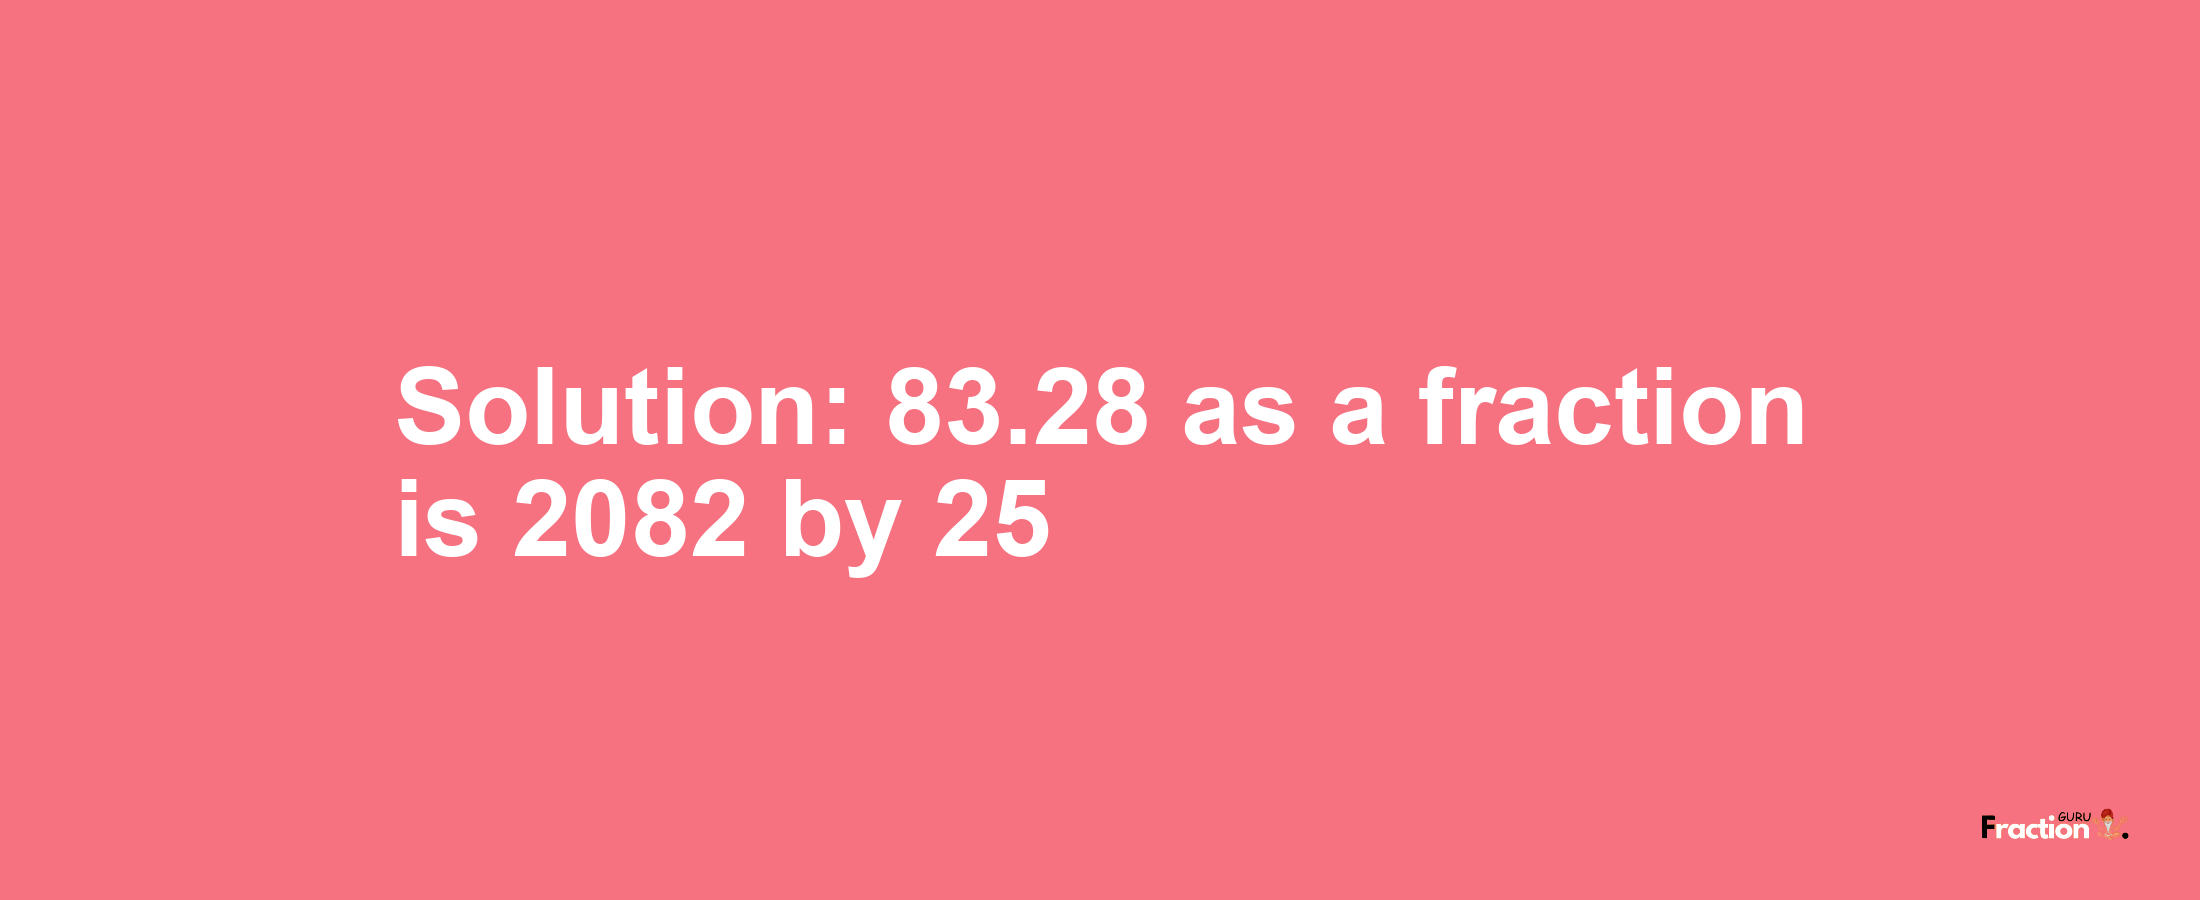 Solution:83.28 as a fraction is 2082/25